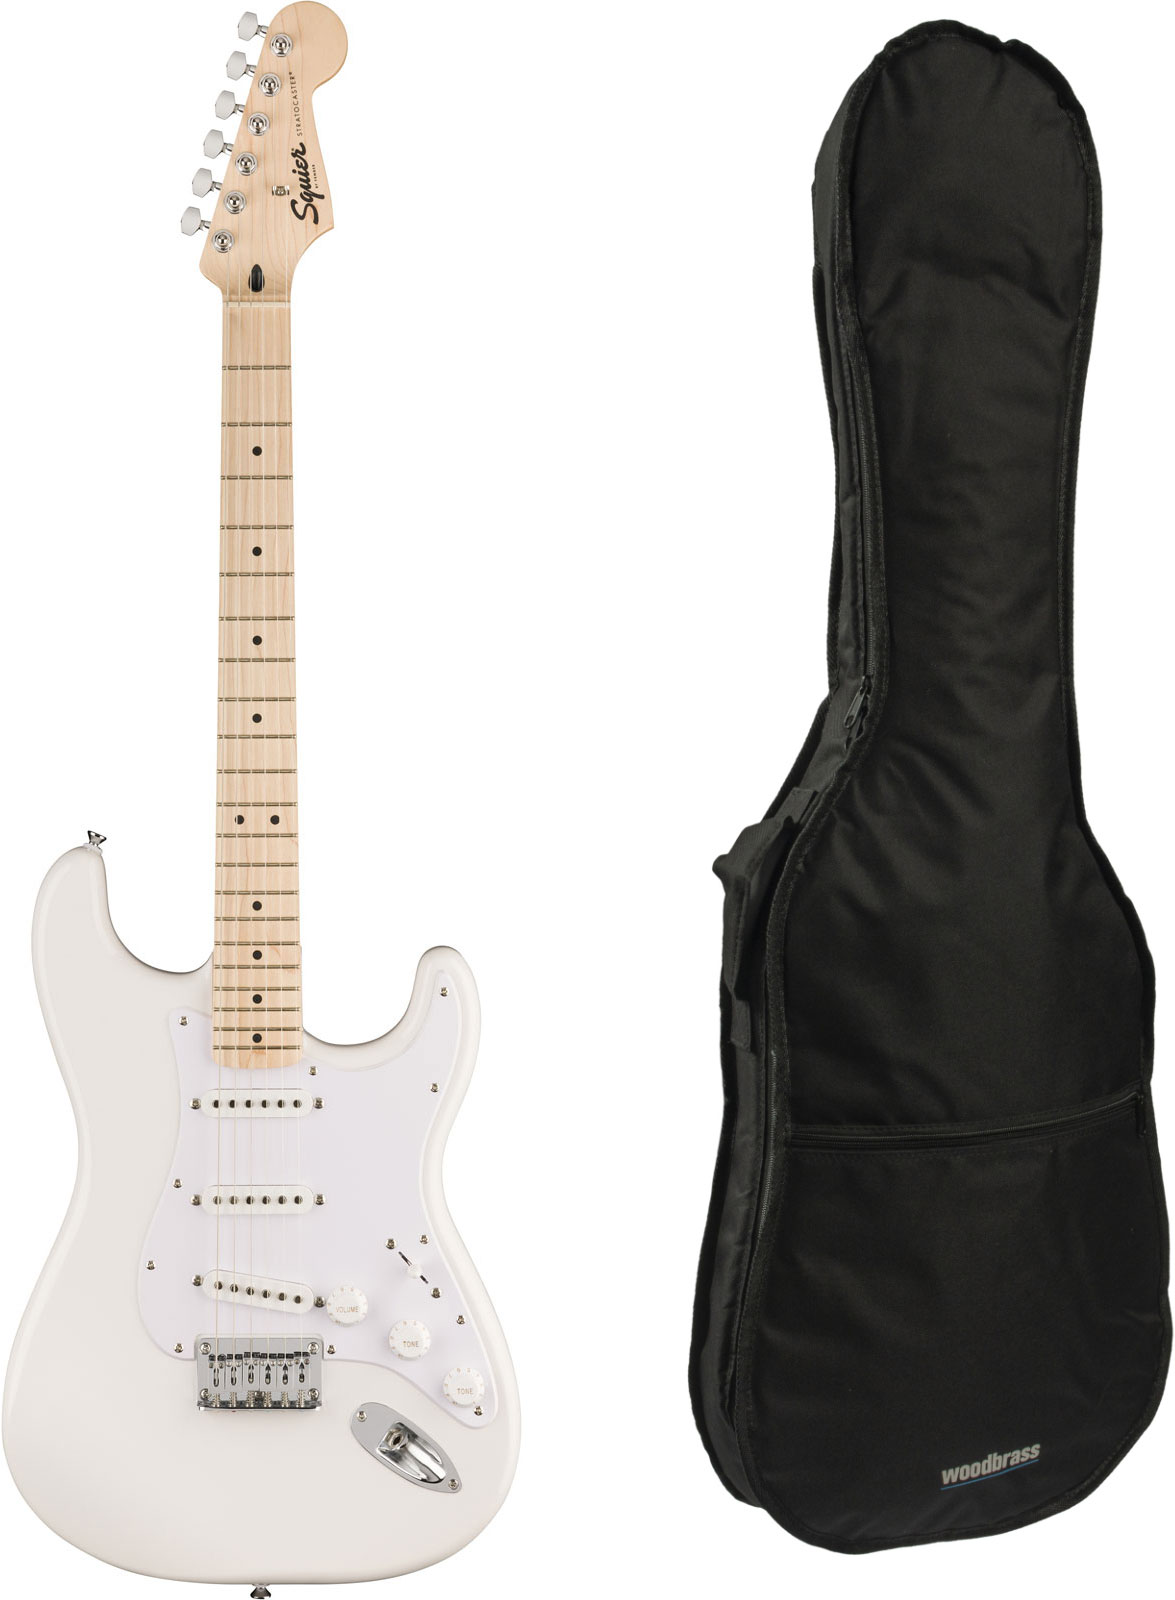 SQUIER PACK SONIC STRATOCASTER HT MN ARCTIC WHITE + GIGBAG